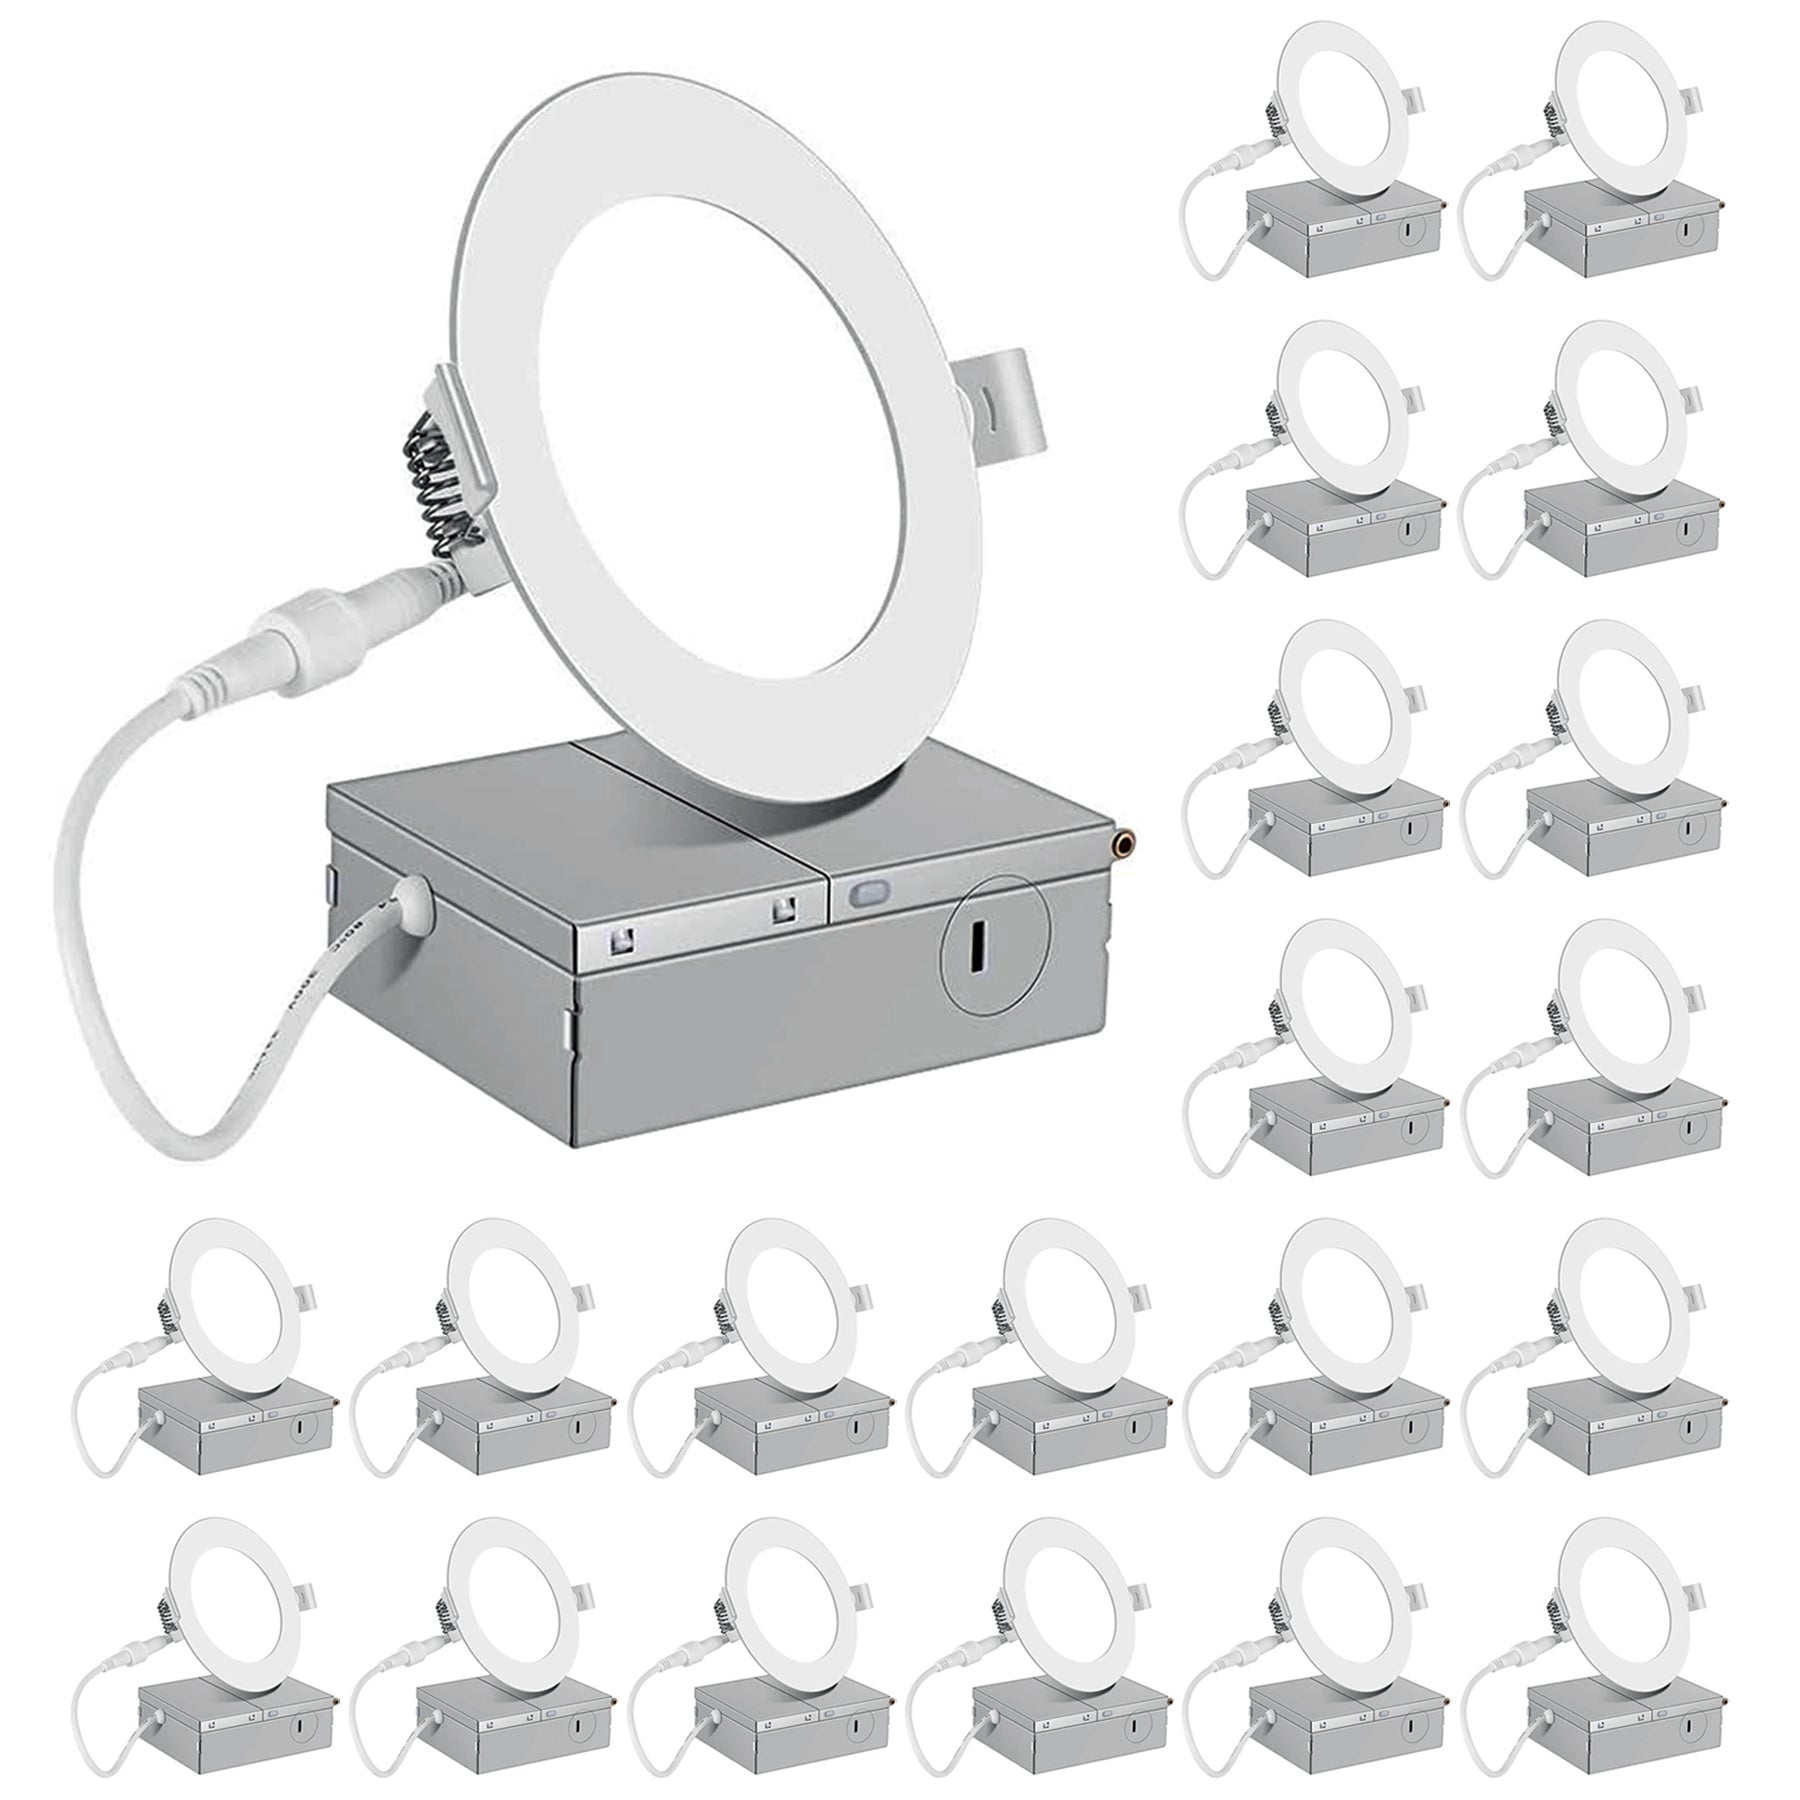 4 Inch 20 Pack (9 Watt 700 Lumens), LED Ceiling Lights with Junction Box